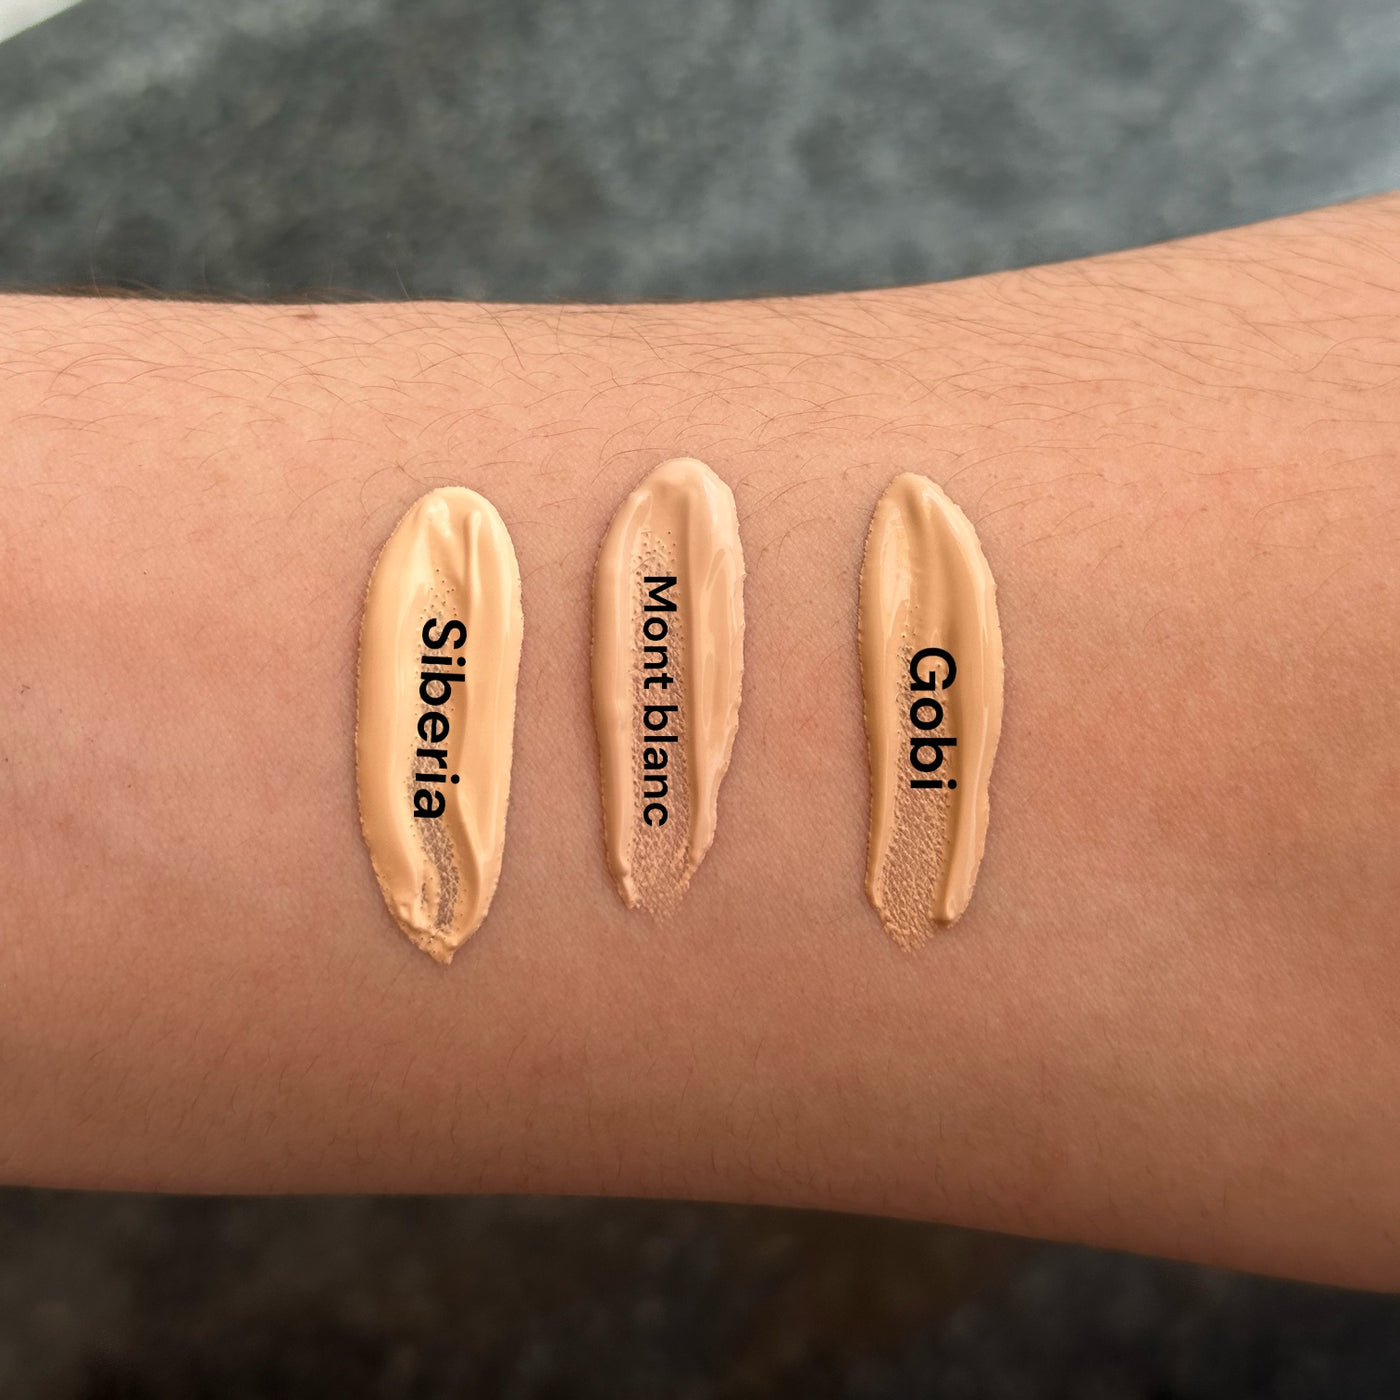 Nars Foundation ( High Quality Dupe )